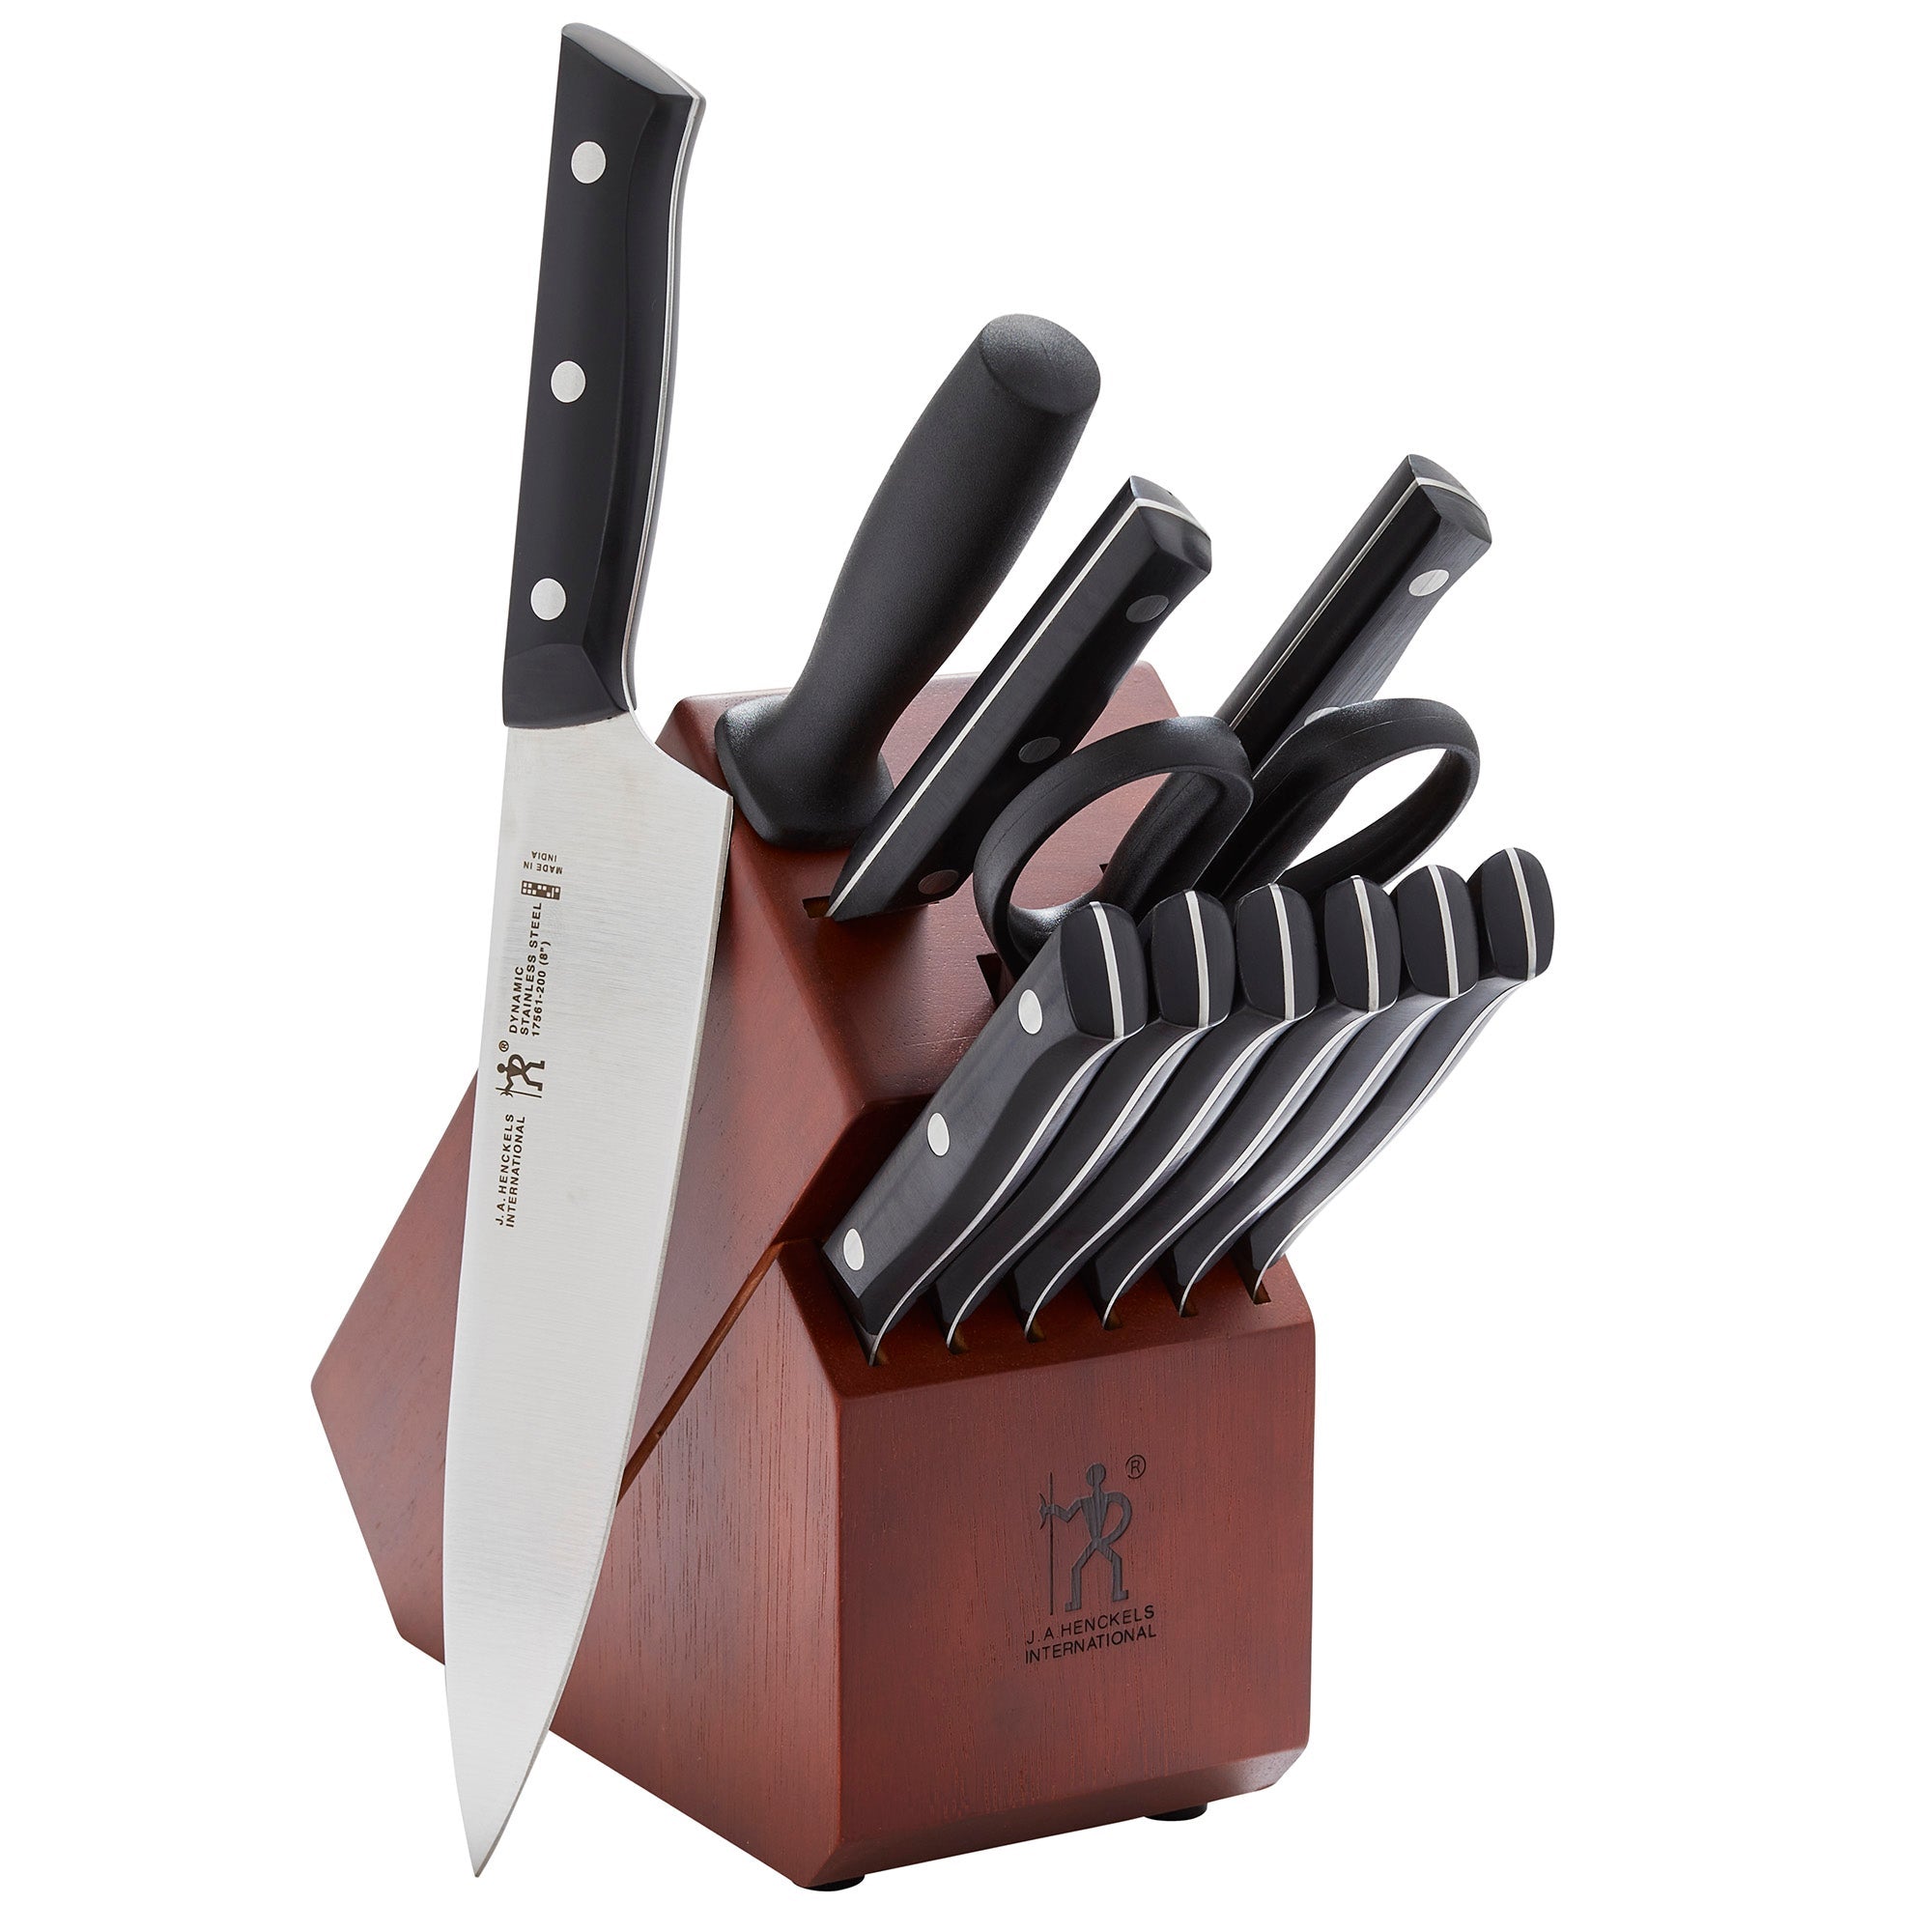 Gov't & Military Discounts on 8pc Stainless Steel Serrated Steak